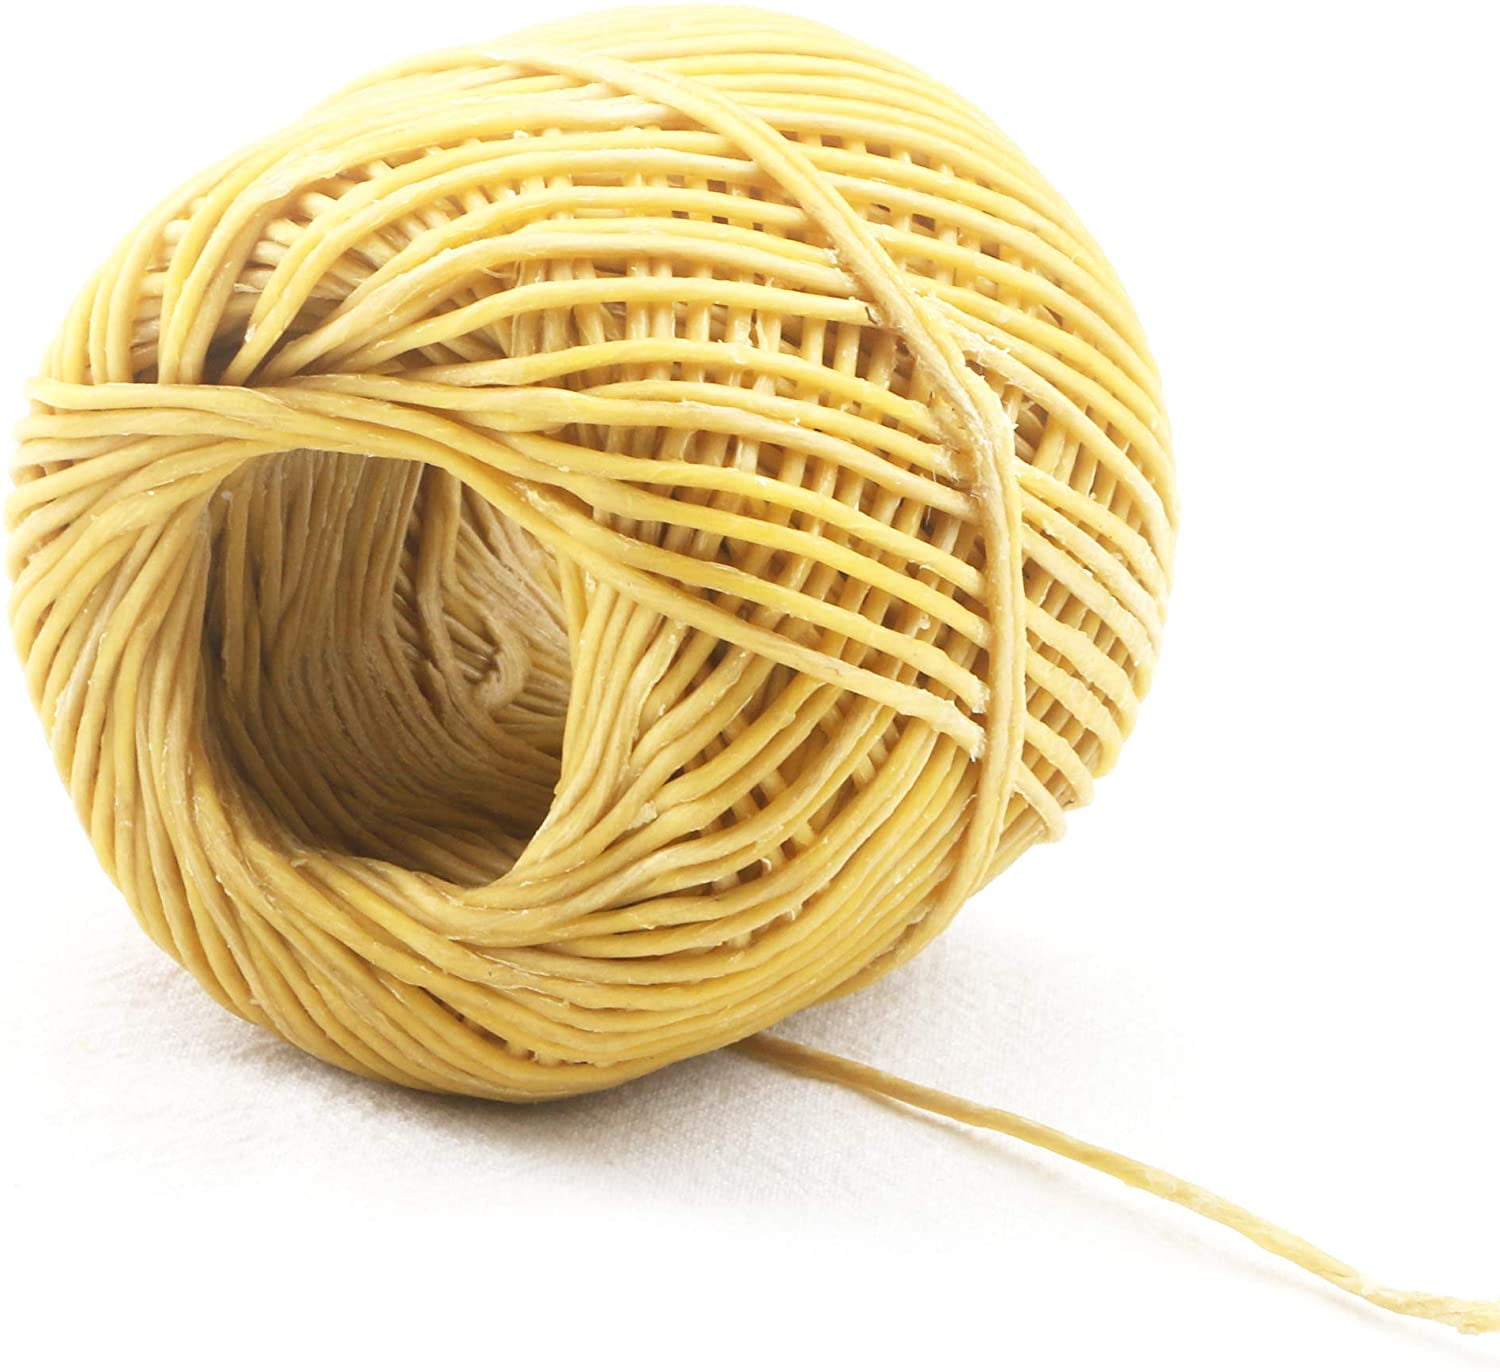  MILIVIXAY 3.5 Inch Hemp Wick,100 Piece Hemp Candle Wicks,  Pre-Waxed by 100% Natural Beeswax & Tabbed, Beeswax Wicks for Candle  Making. : Home & Kitchen